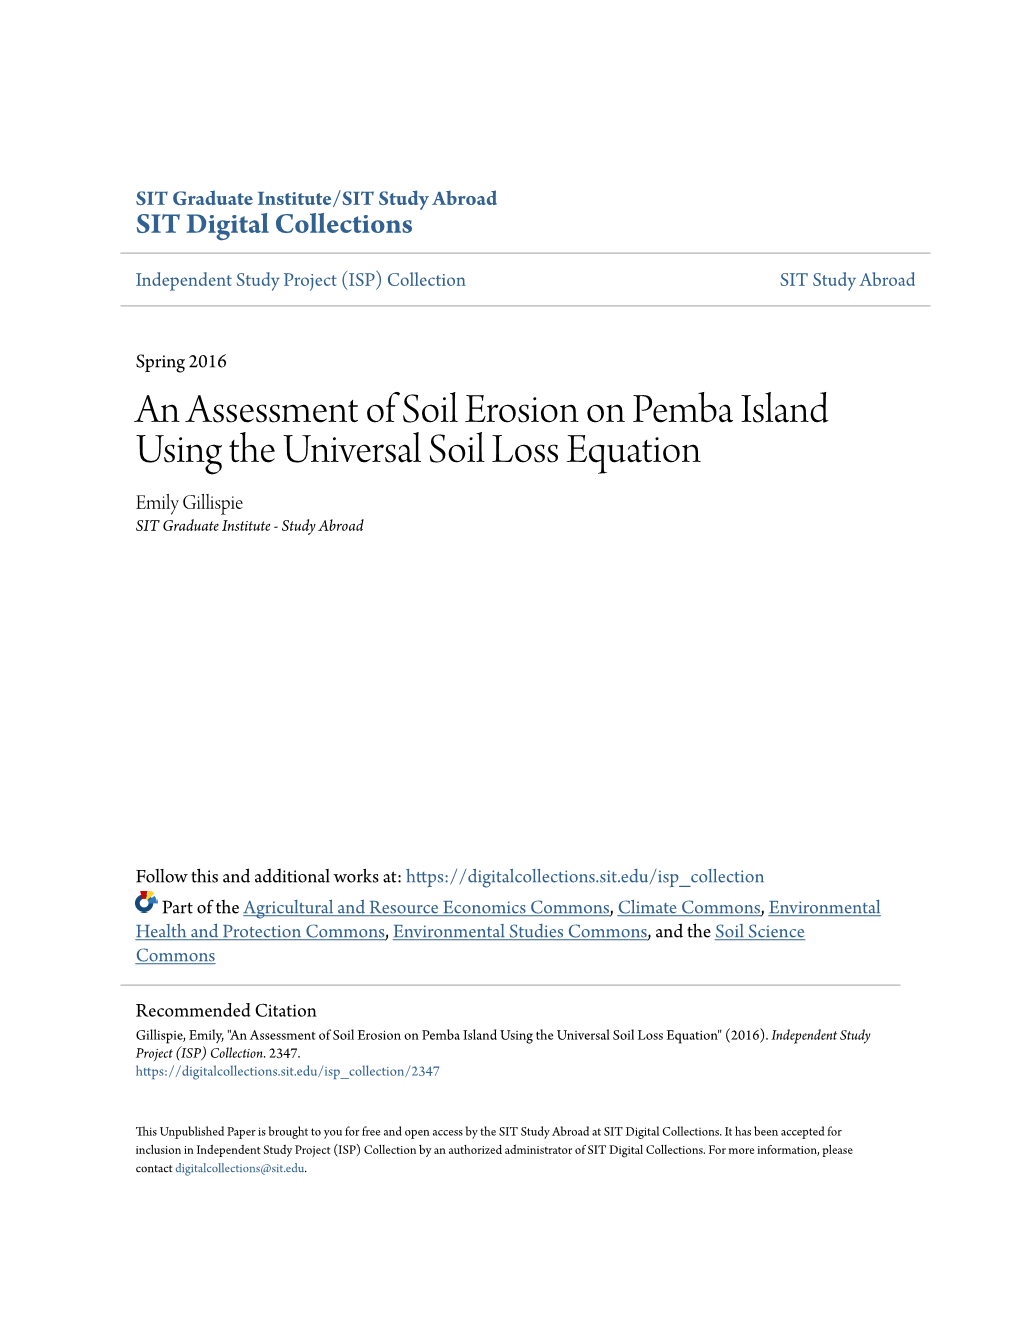 An Assessment of Soil Erosion on Pemba Island Using the Universal Soil Loss Equation Emily Gillispie SIT Graduate Institute - Study Abroad